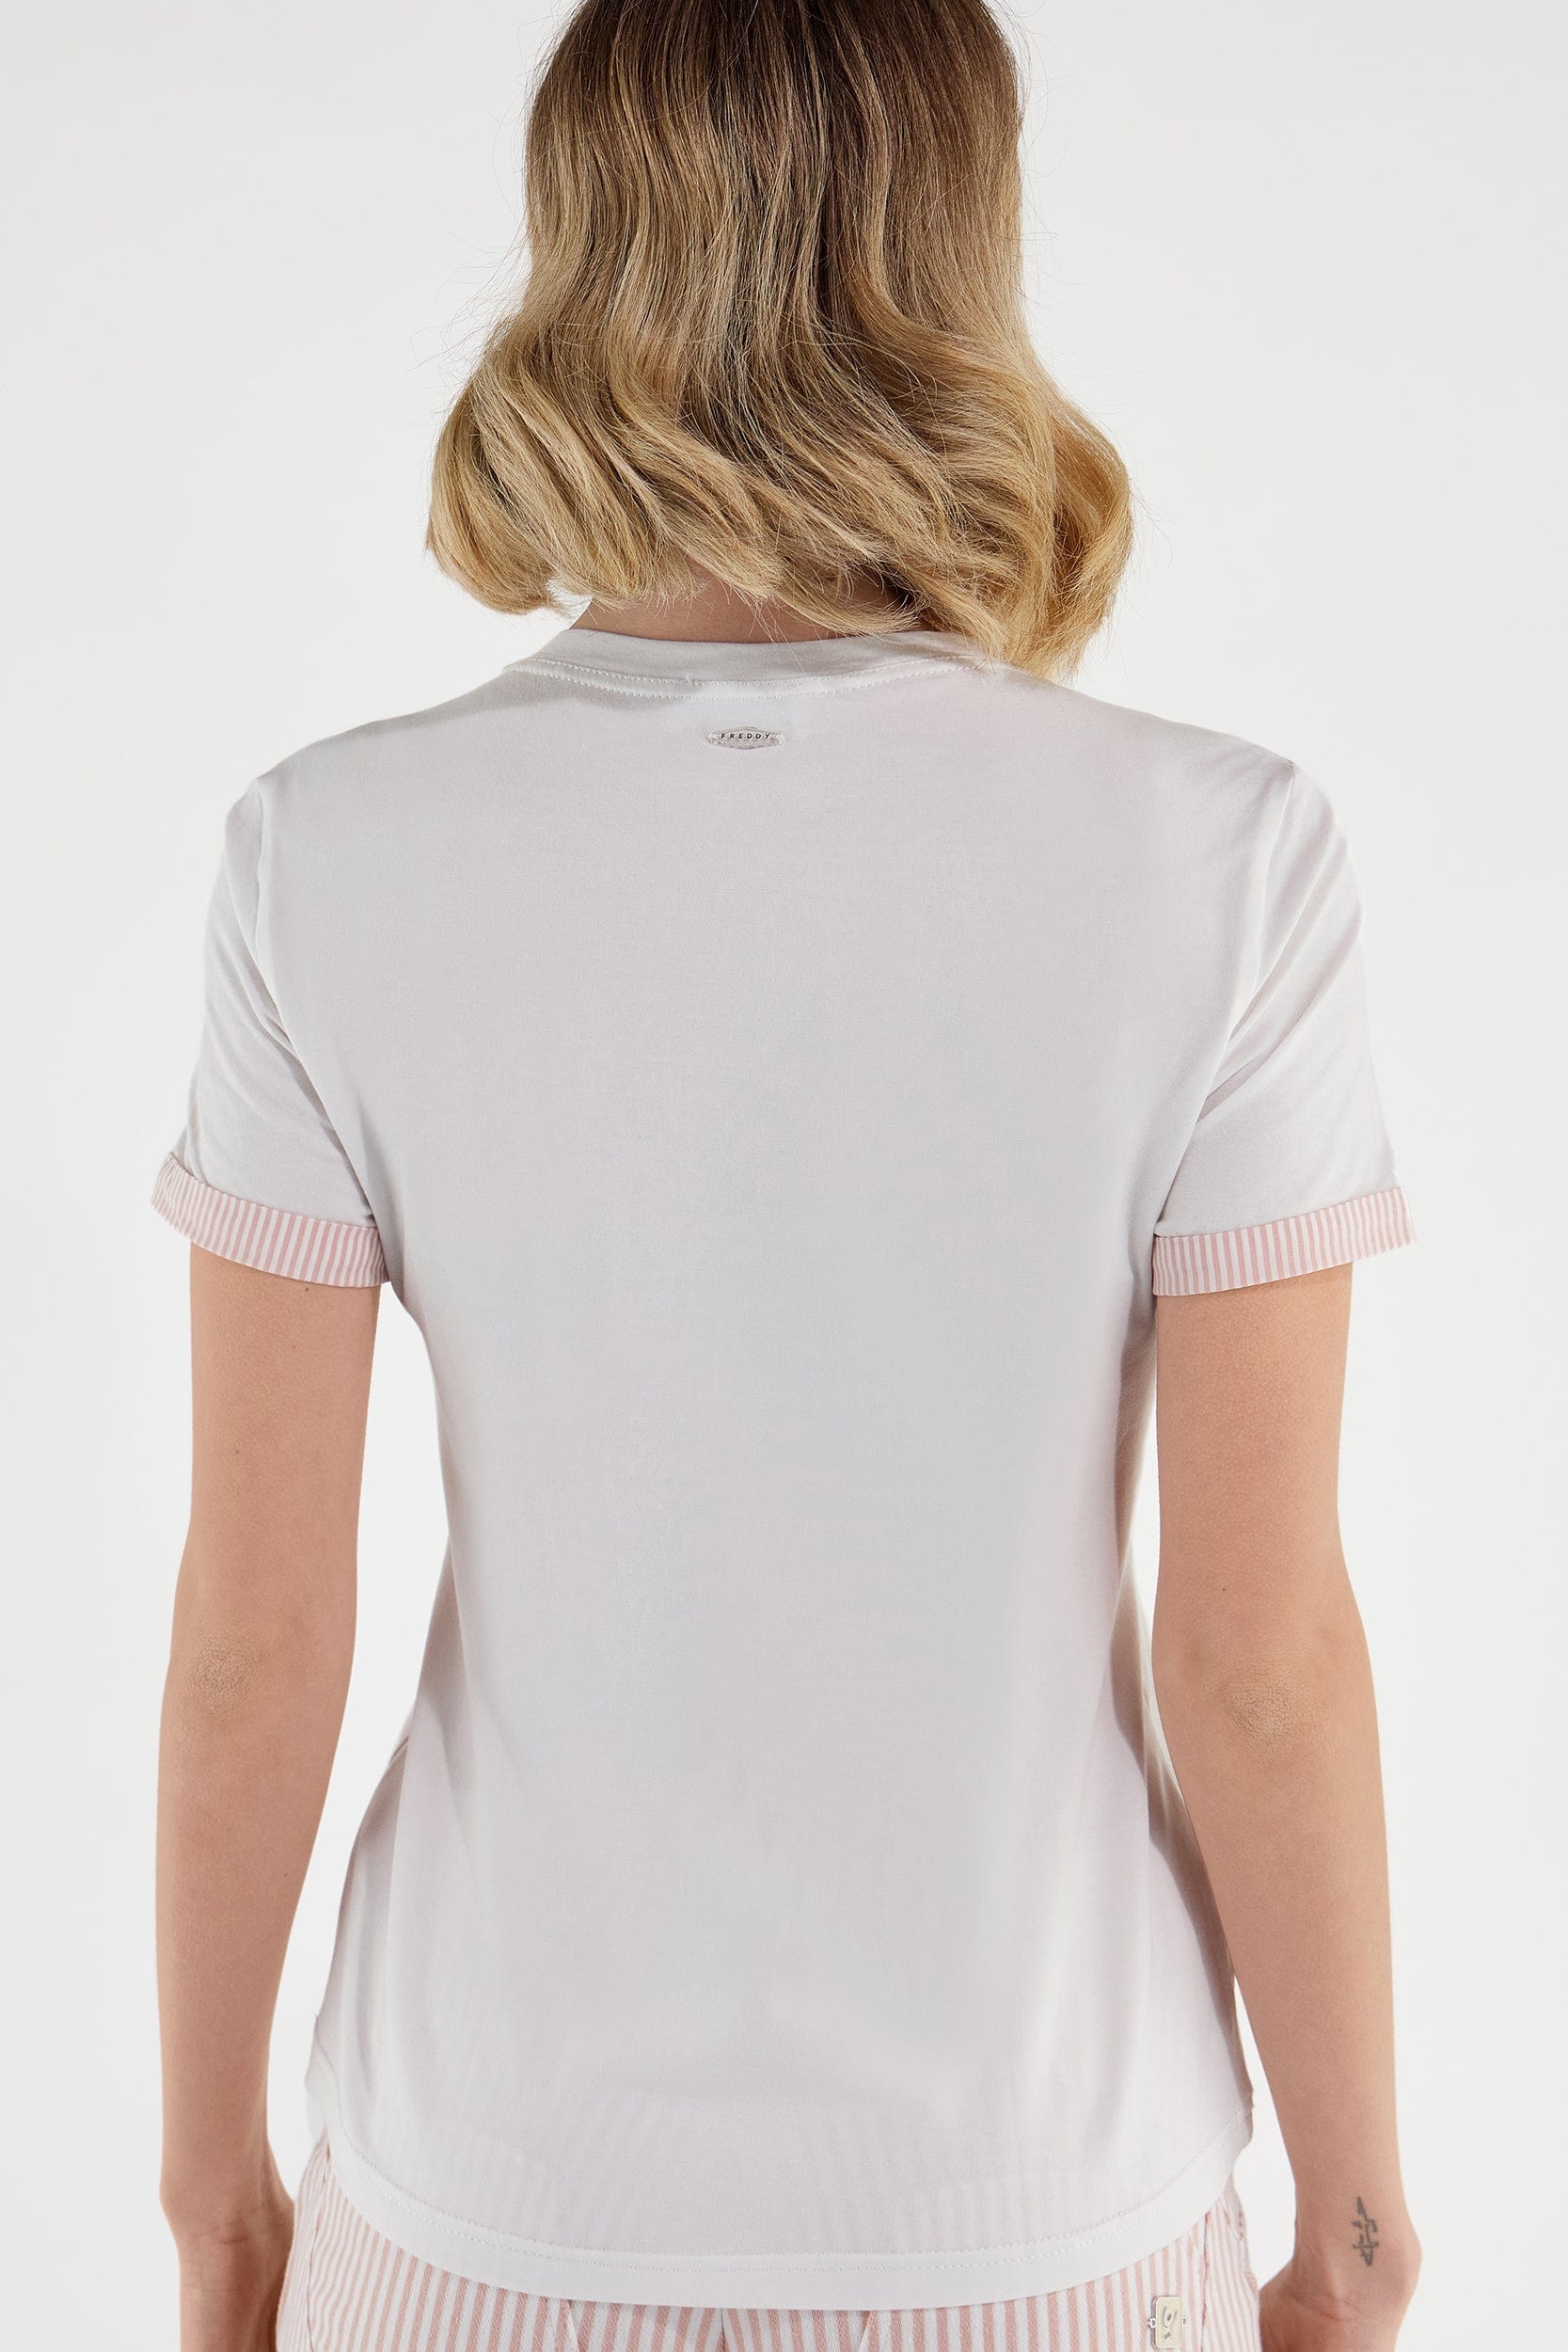 T Shirt with Striped Trim - White + Pink 3